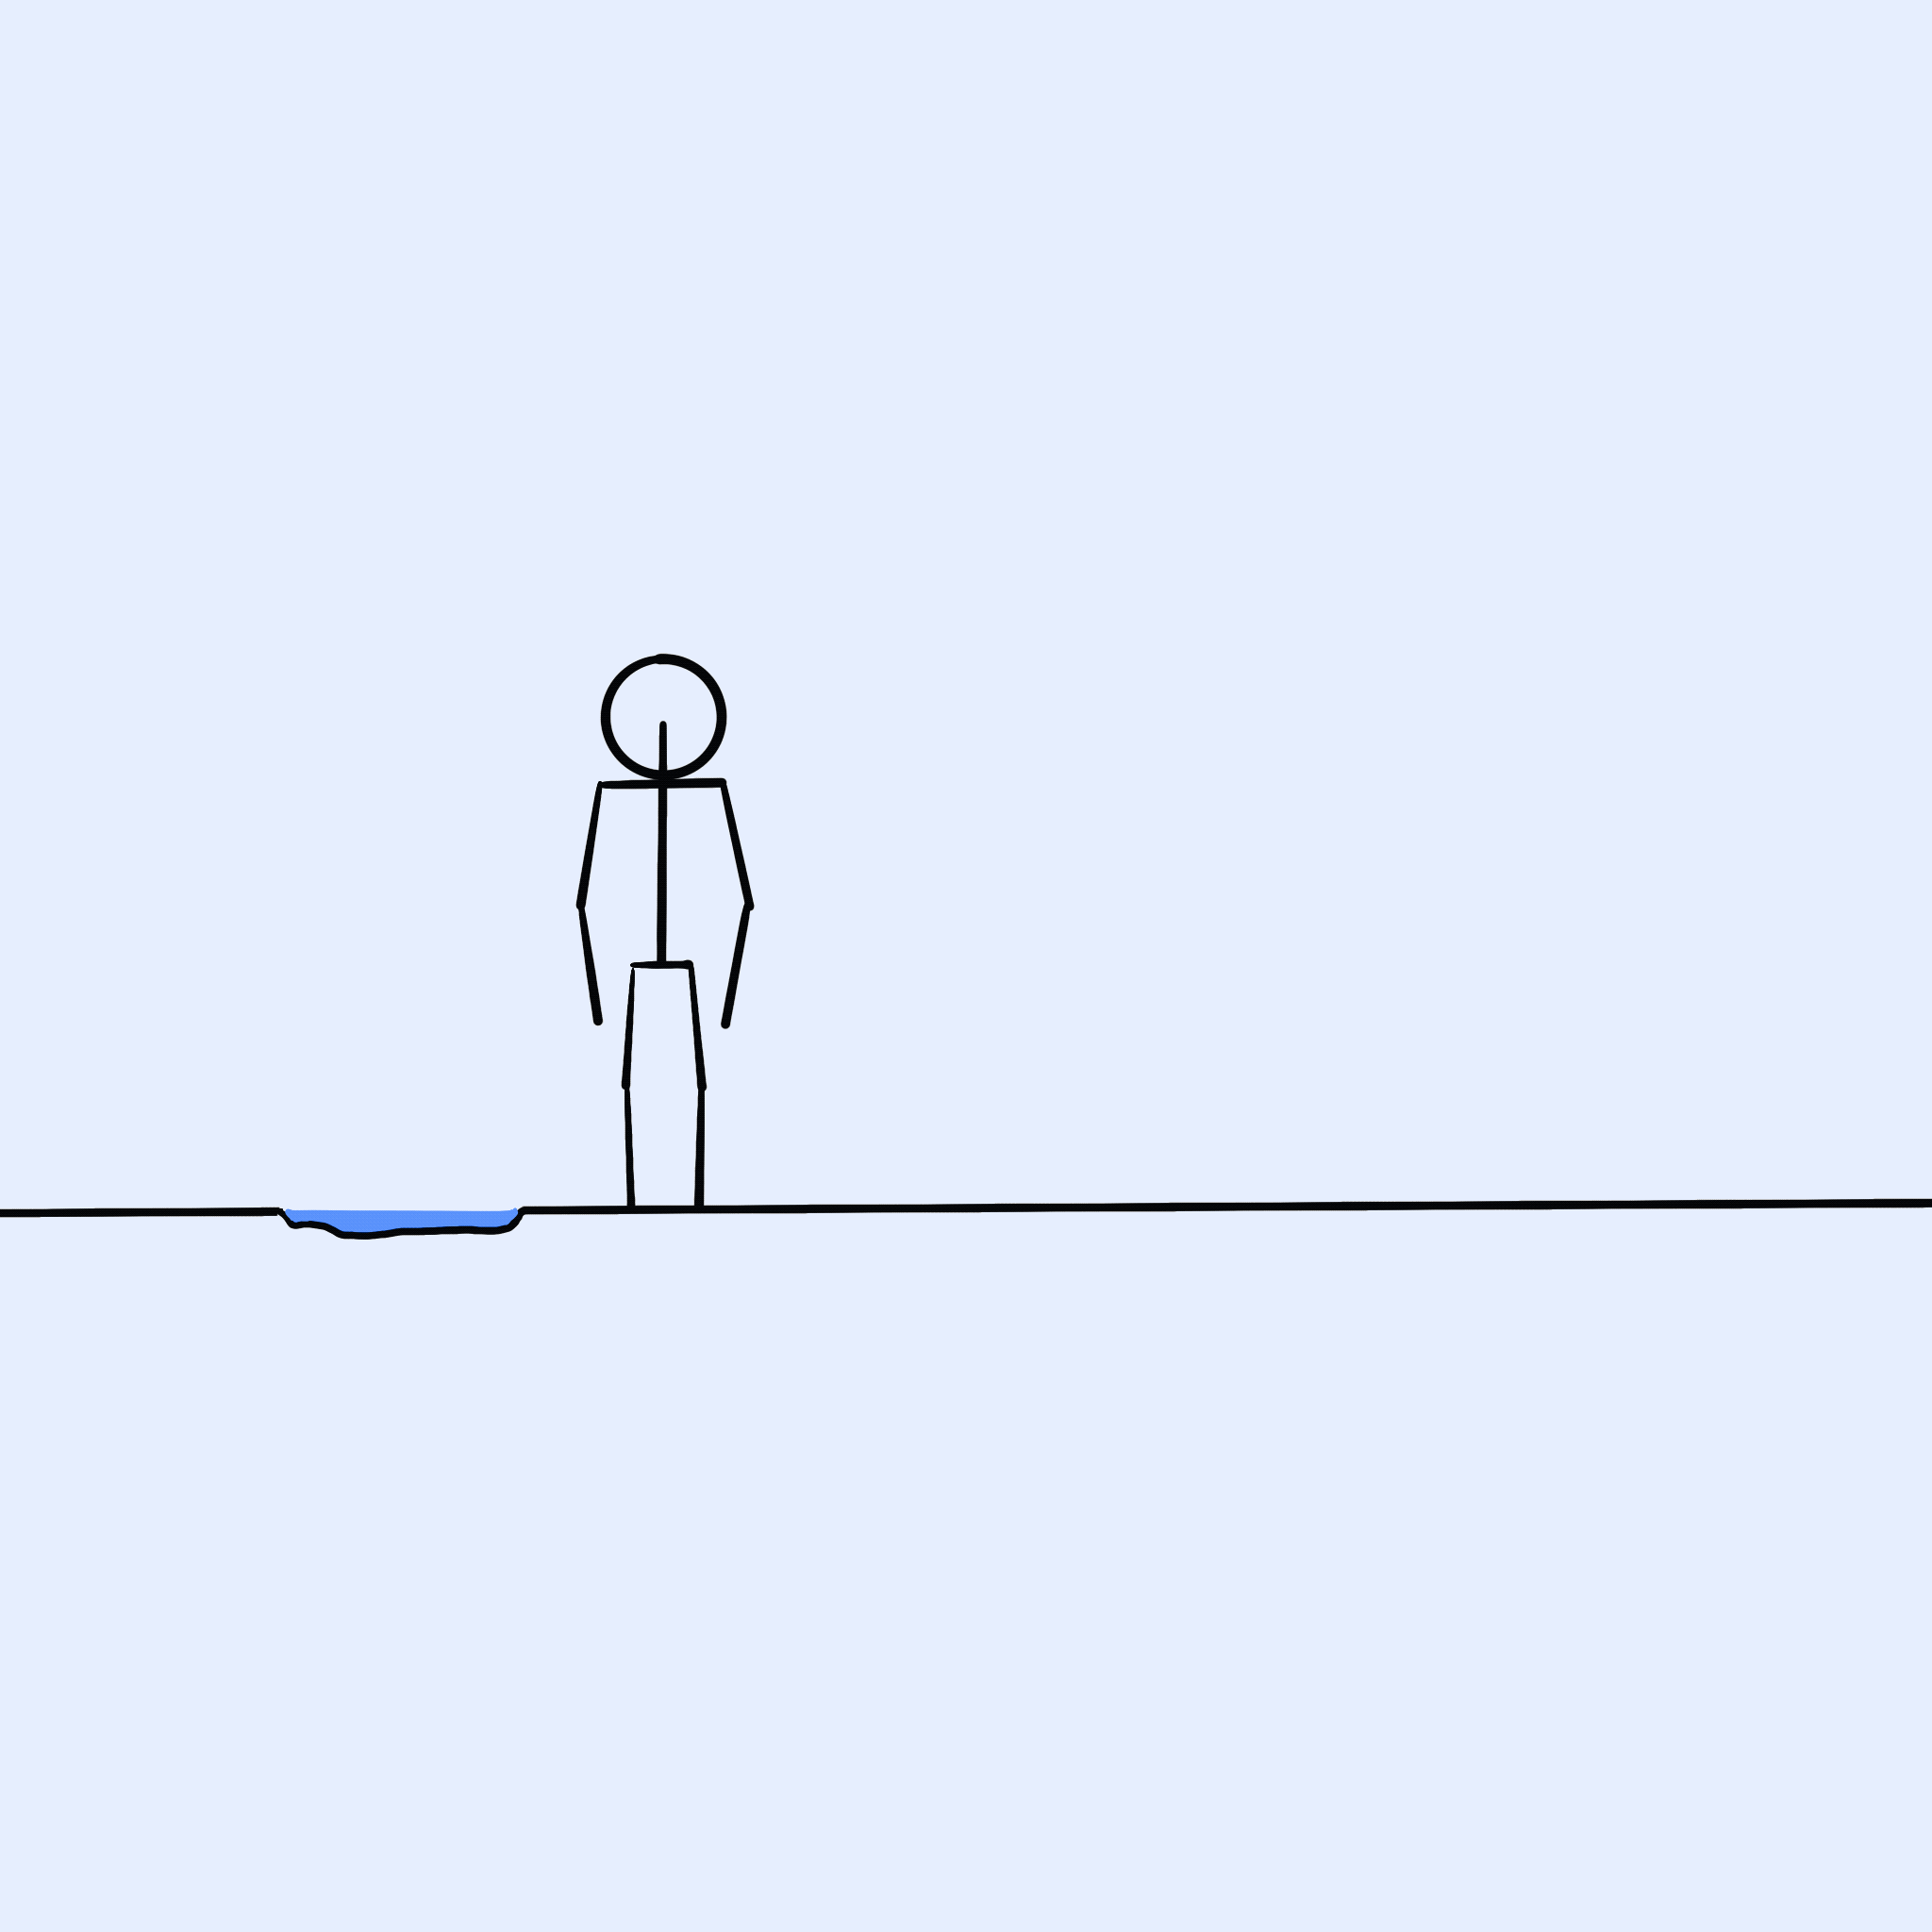 I used to use a site called DoInk.com to create frame-by-frame animations when I was only 12 or 13 years old. Those animations were pretty simple stick figures, and it's good to know that 15 years later I'm still only capable of animating stick figures.